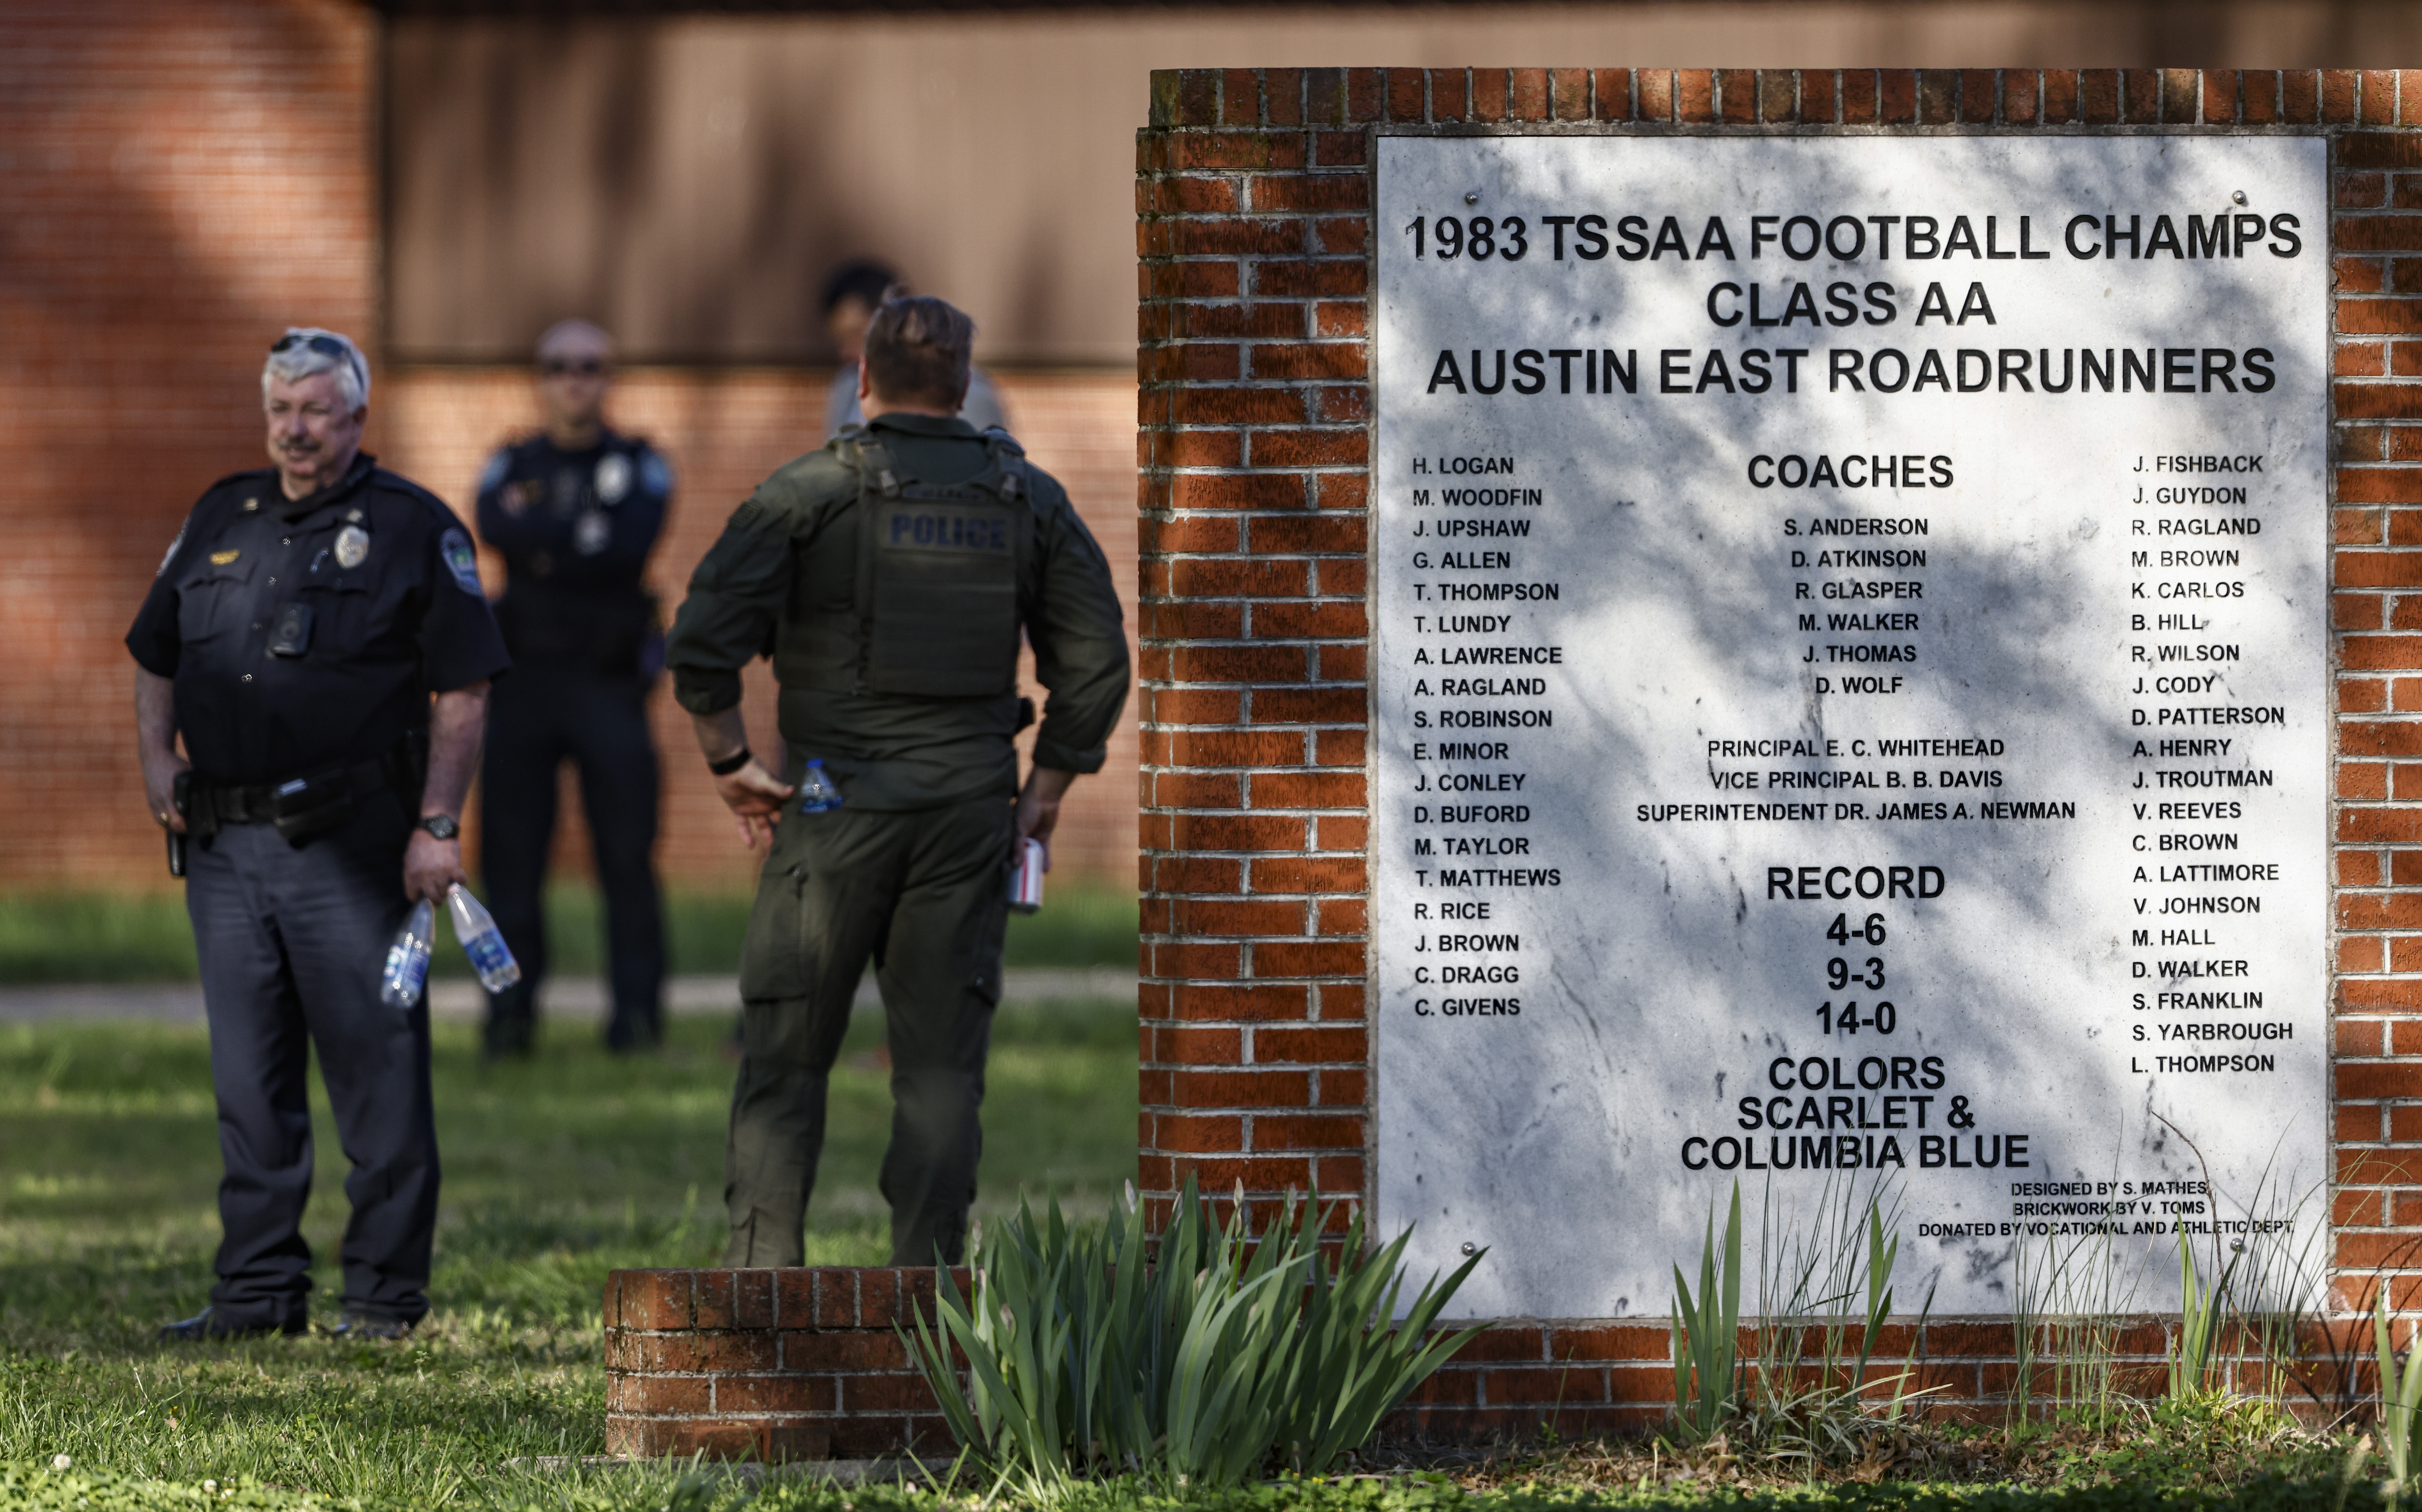 Student Fires At Officers At Tennessee School Is Killed